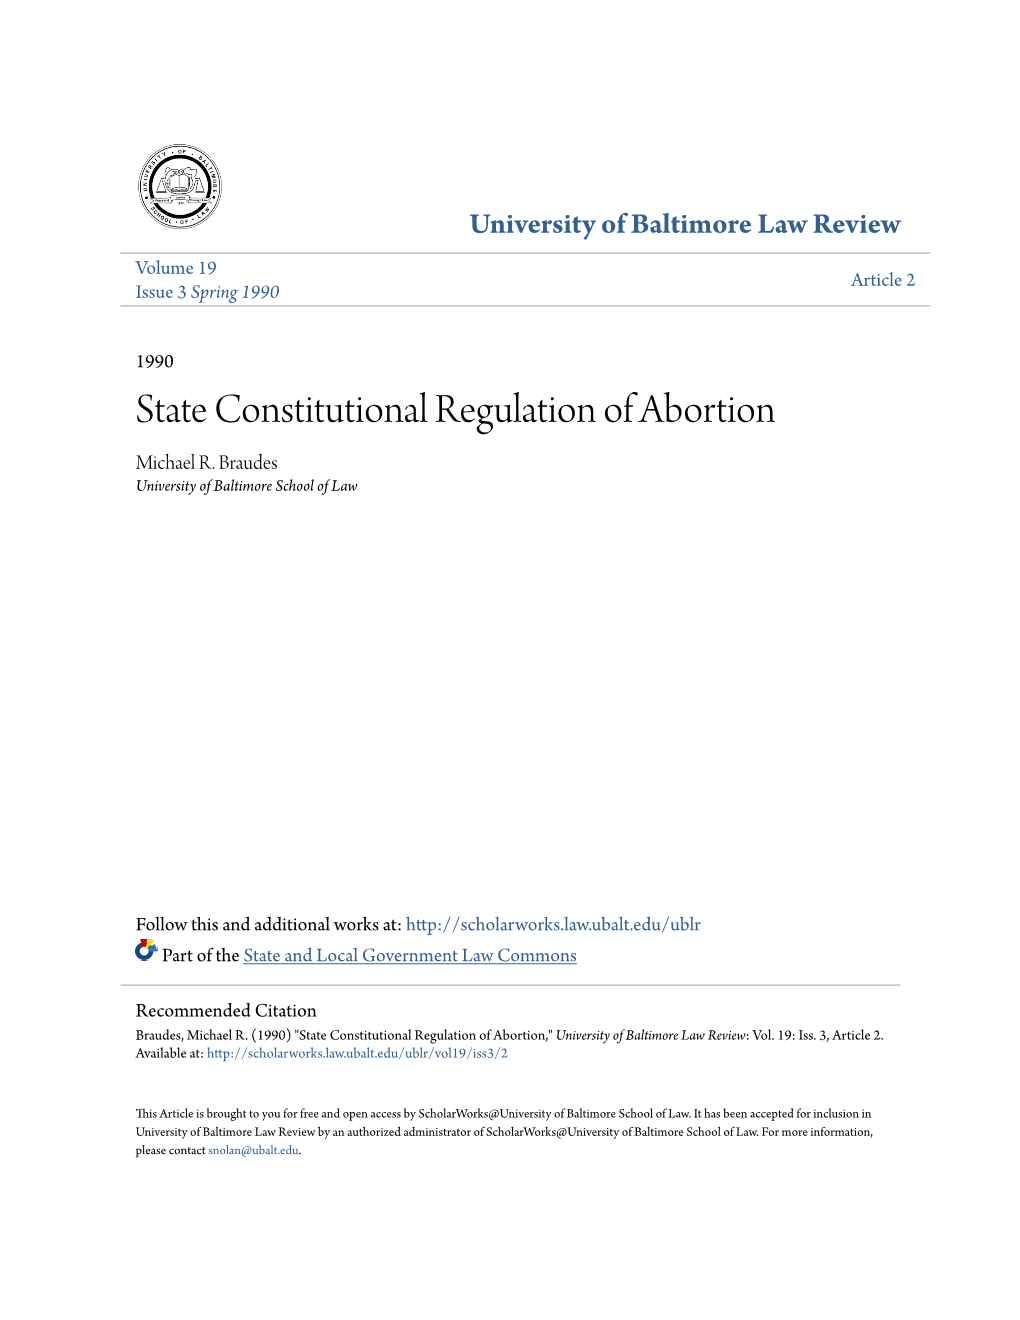 State Constitutional Regulation of Abortion Michael R